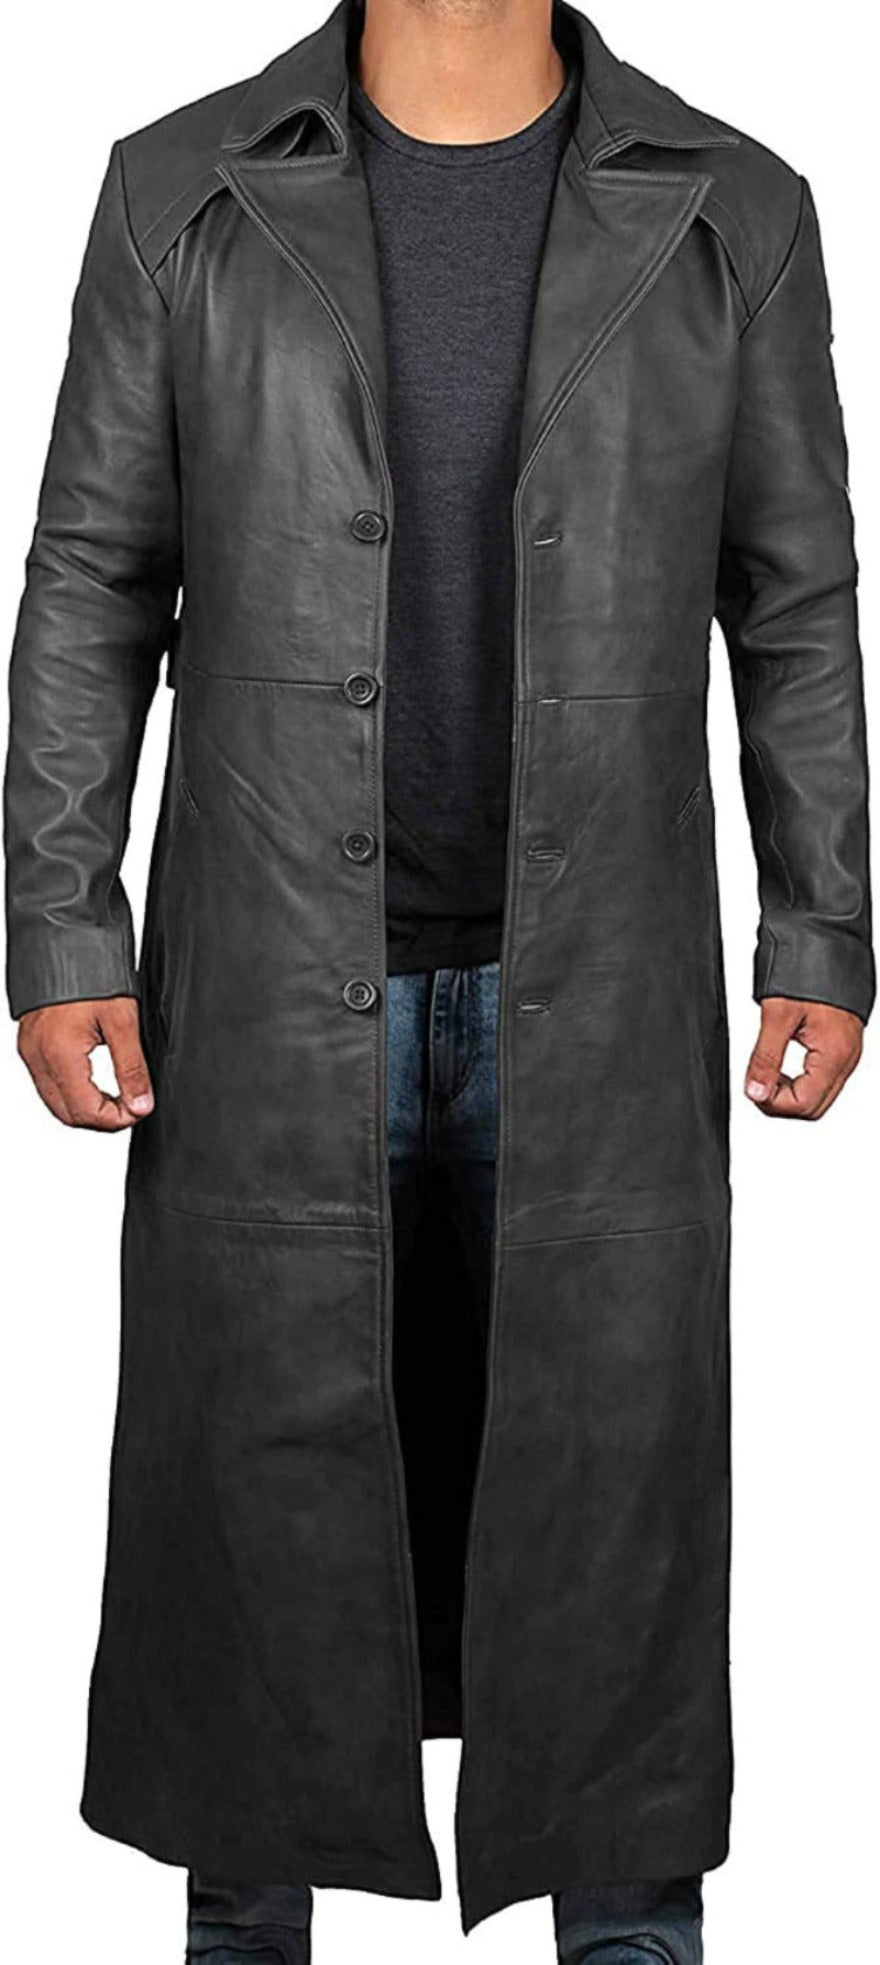 Picture of a model wearing our mens leather trench coat full length, Black color, Front view.